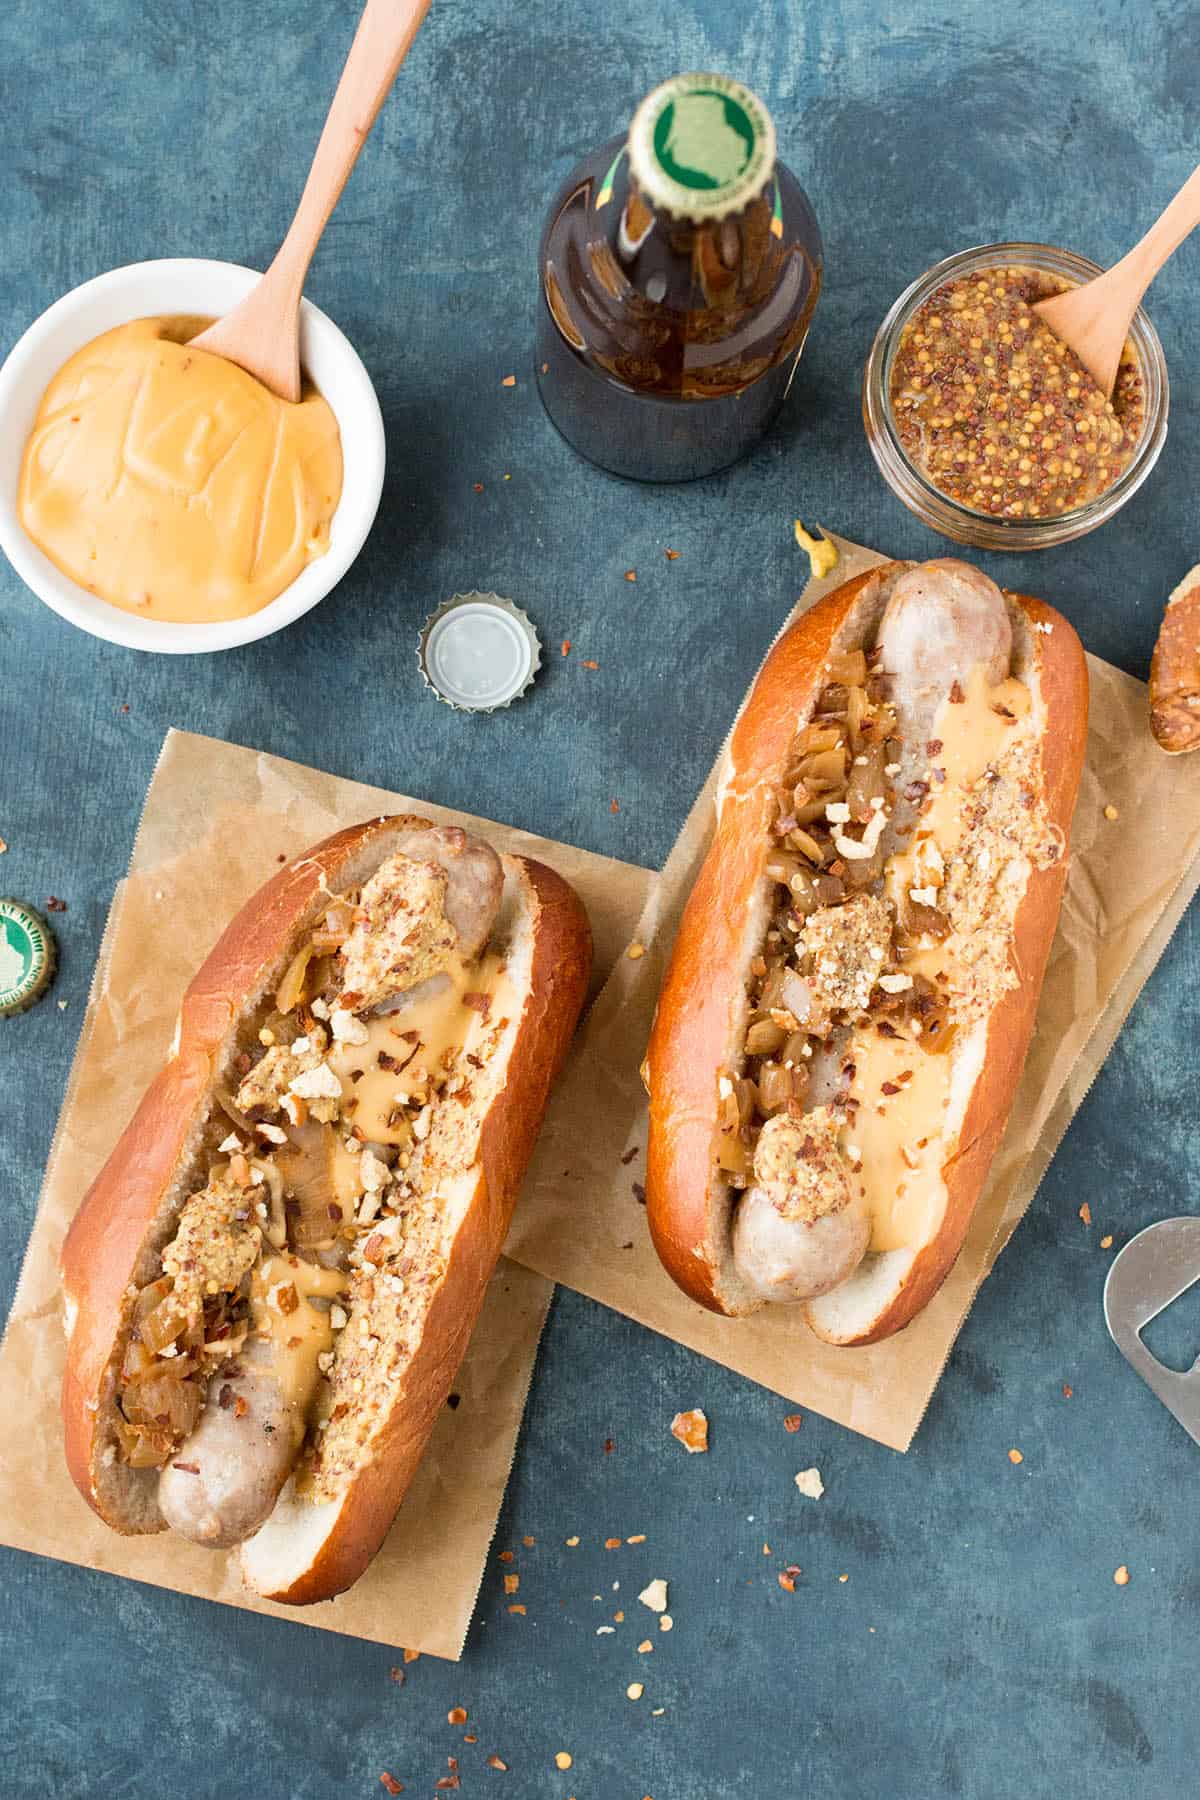 Grilled Beer Brats with Homemade Beer Cheese - Ready to Eat!